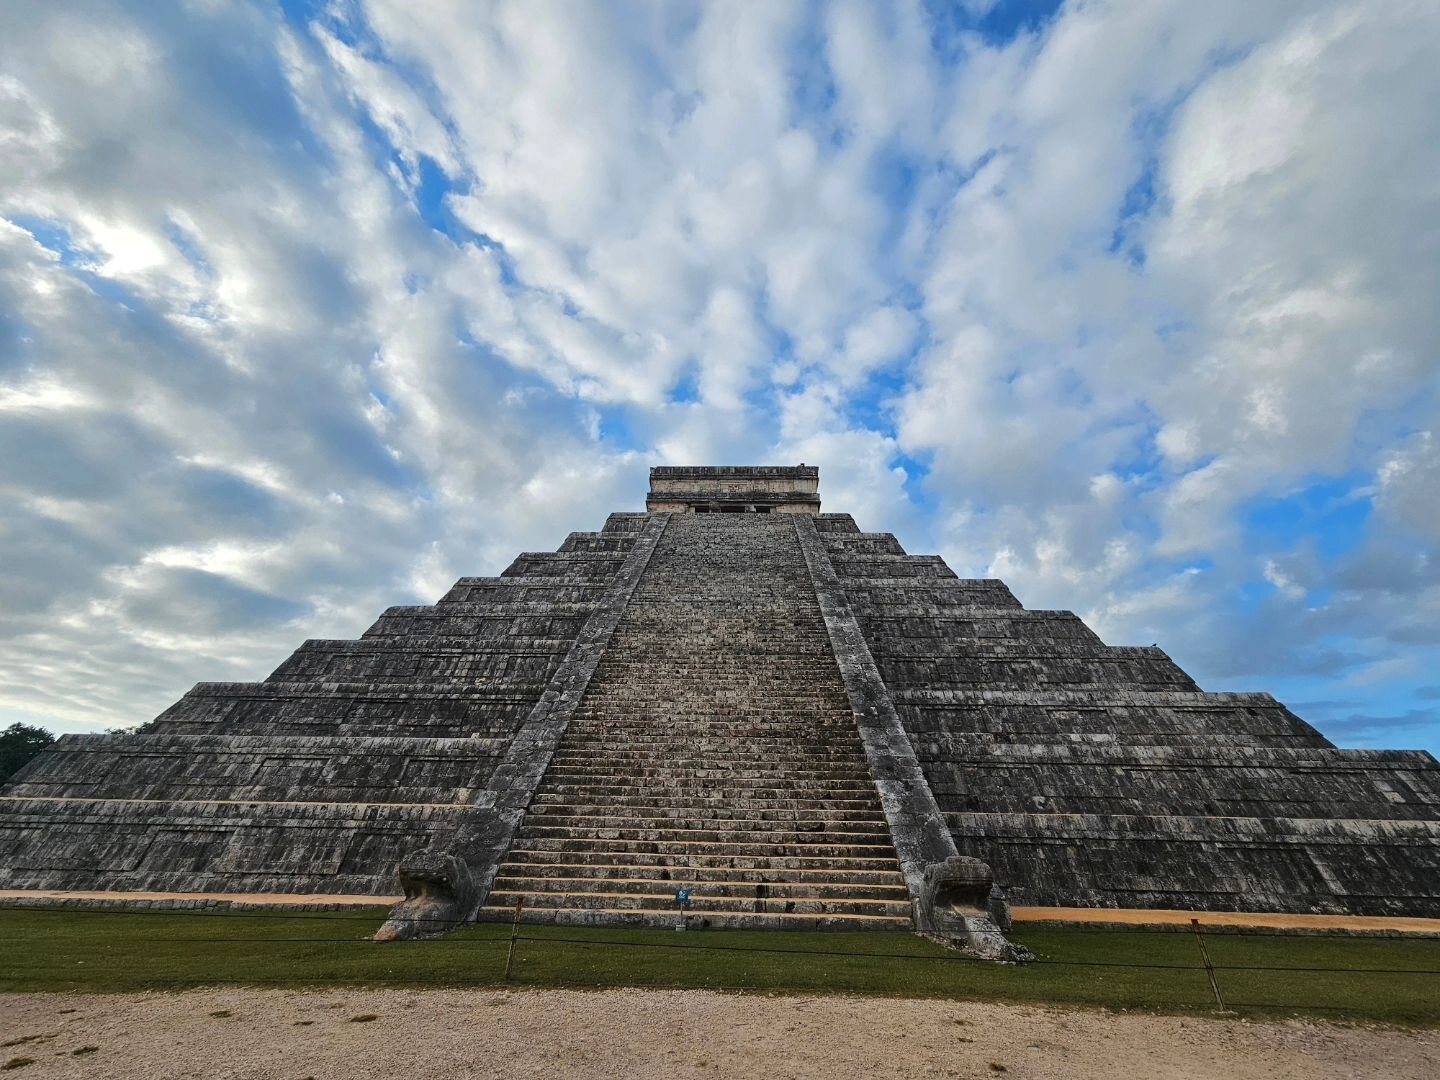 Exploring the ancient wonders of Chichen Itza, where history whispers through the stones and each step is a journey through time. Thanks to @myquestconcierge for an amazing tour. Used our @chasesapphire travel portal to book the most amazing private 